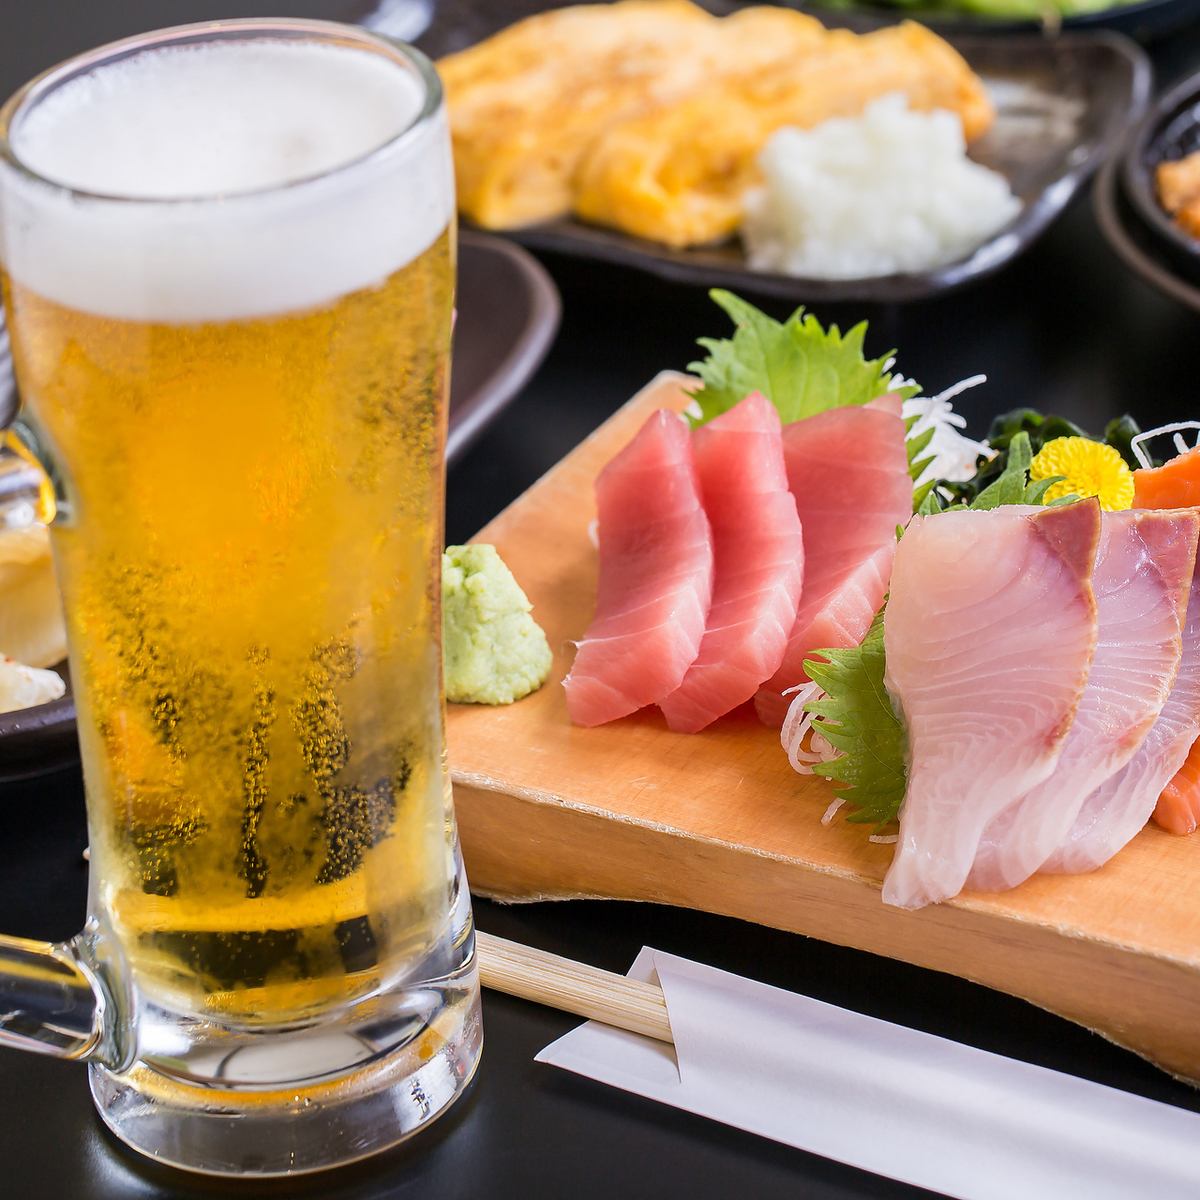 Meals are served individually! 2 hours all-you-can-drink plan is 1,500 yen (tax included)